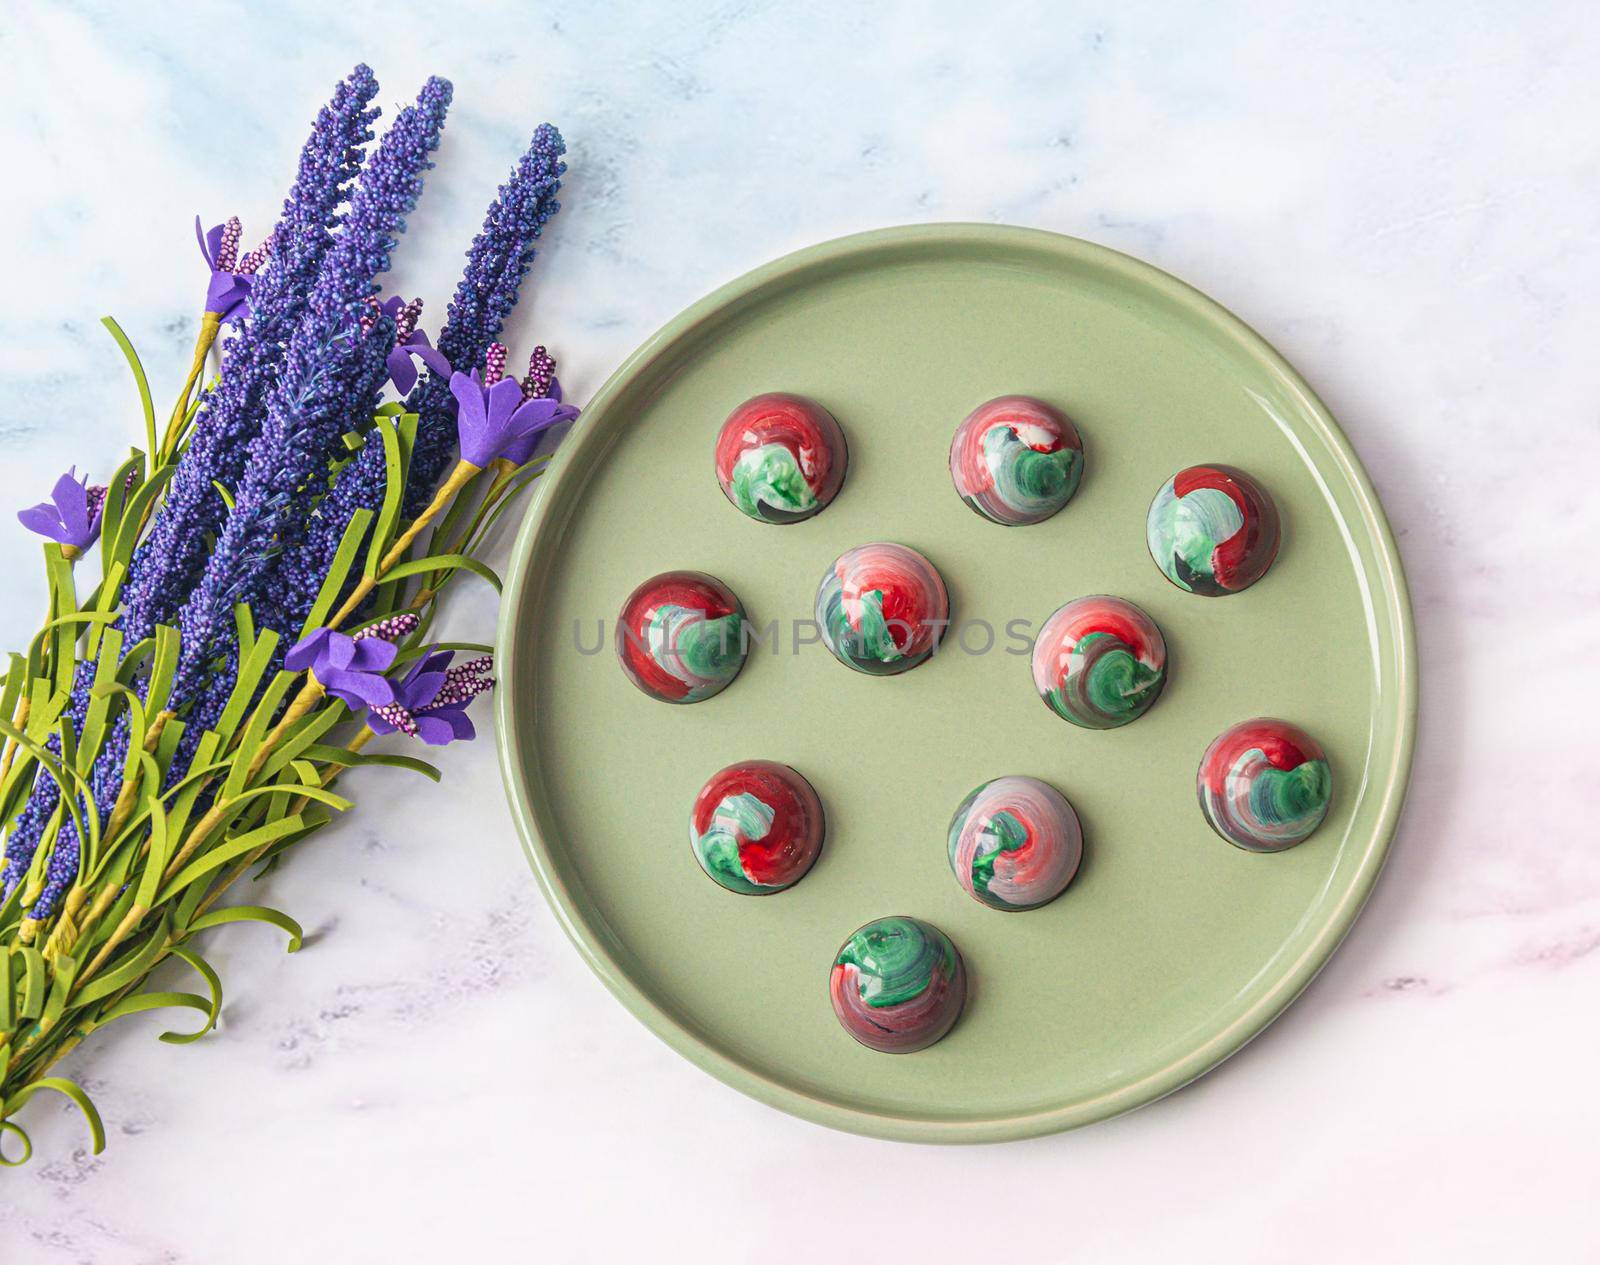 Collectible handmade tempered chocolate sweets with a glossy painted body on a round plate with blur elements. View from above. Stock photography.